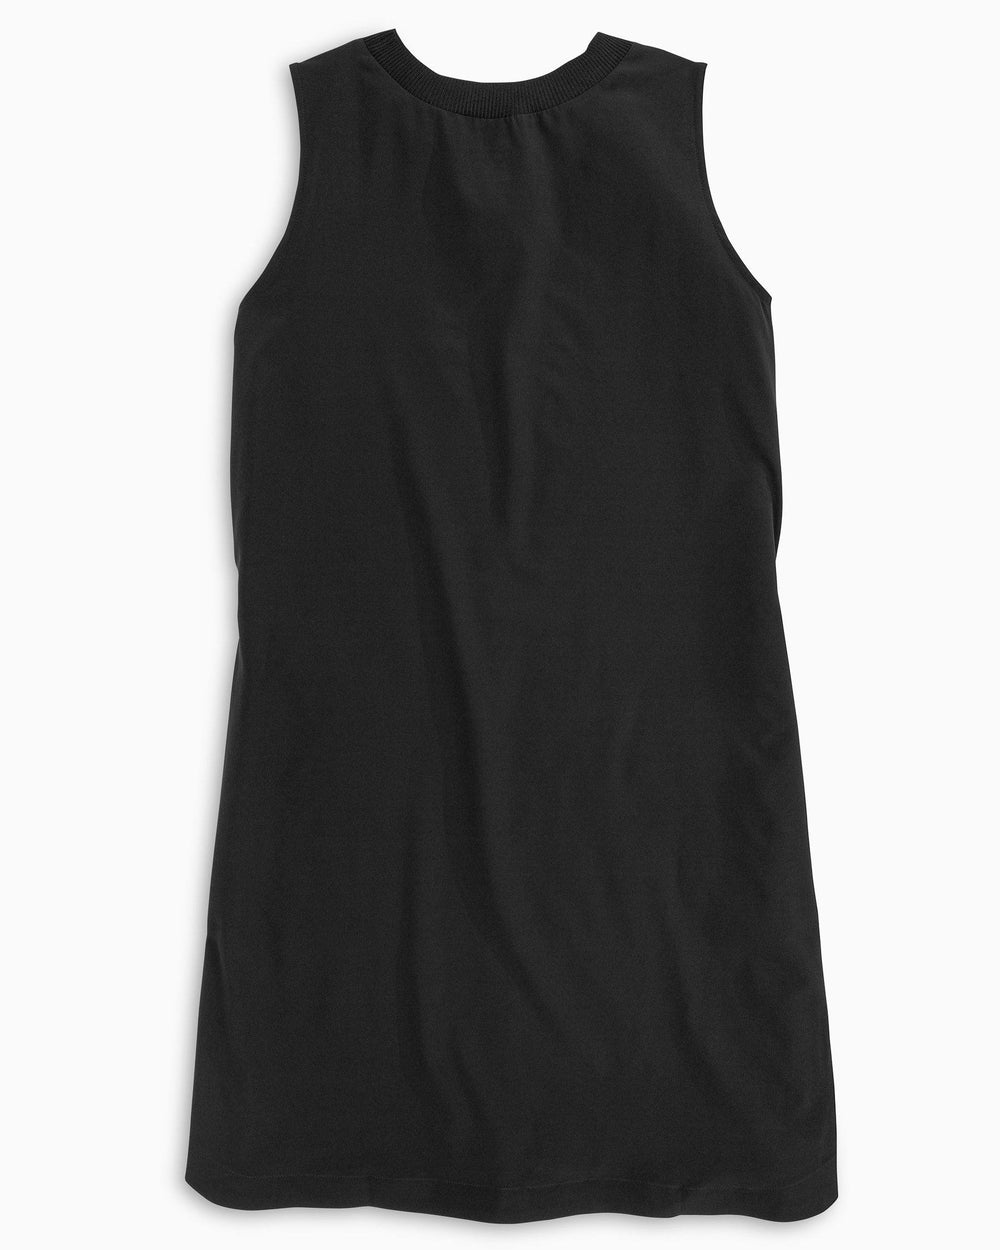 The back view of the Women's Black Gameday Dress by Southern Tide - Black